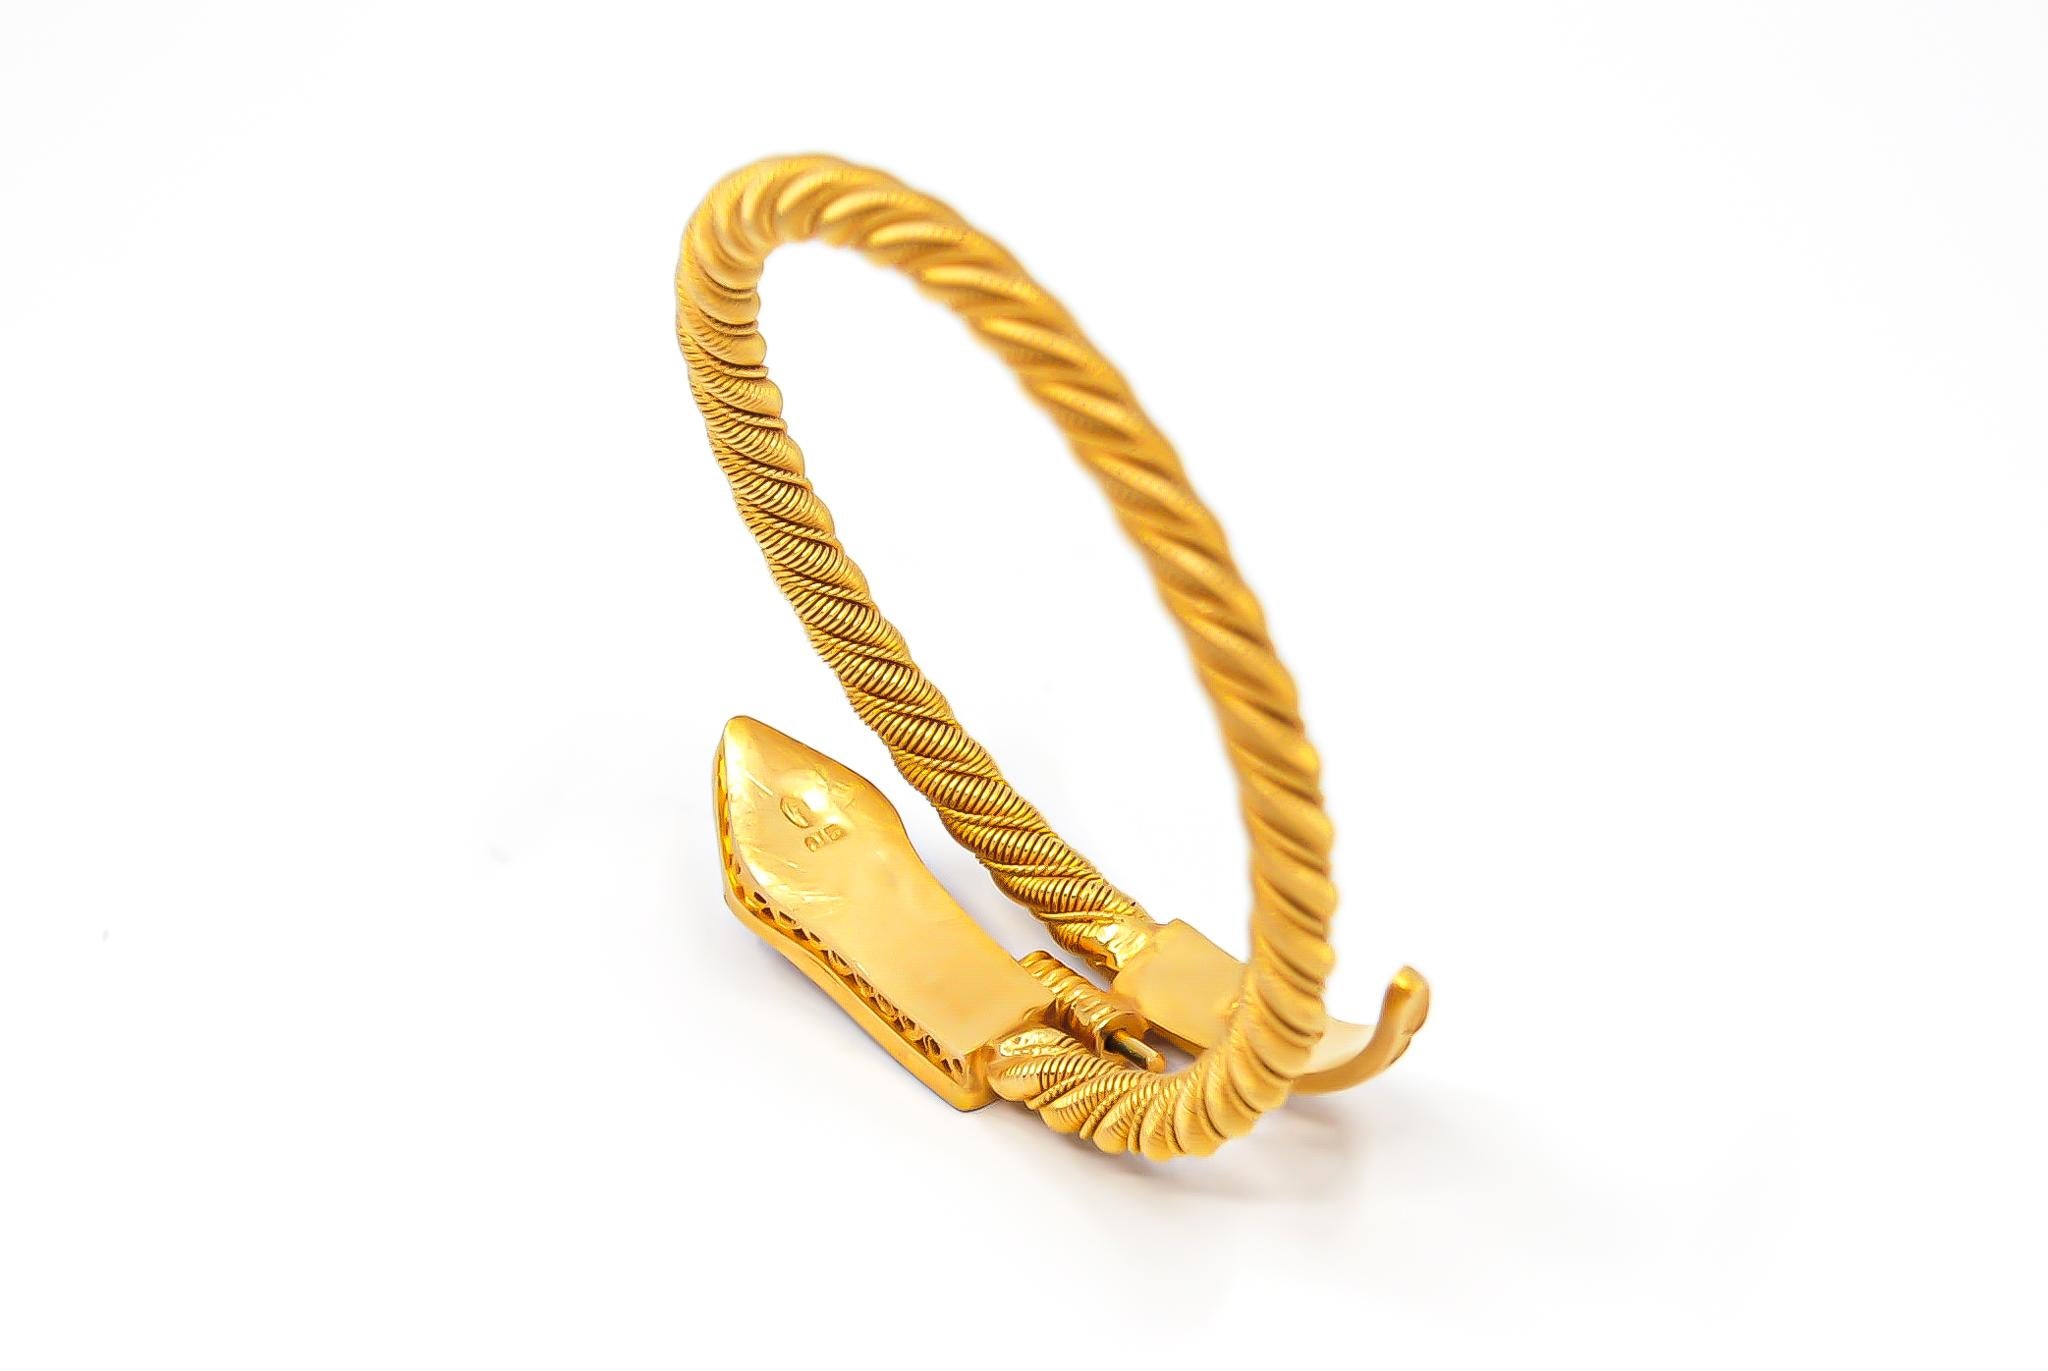 Vintage Serpenti 21kt Solid Gold Cuff Bracelet Dating Back to Early 1960s For Sale 2